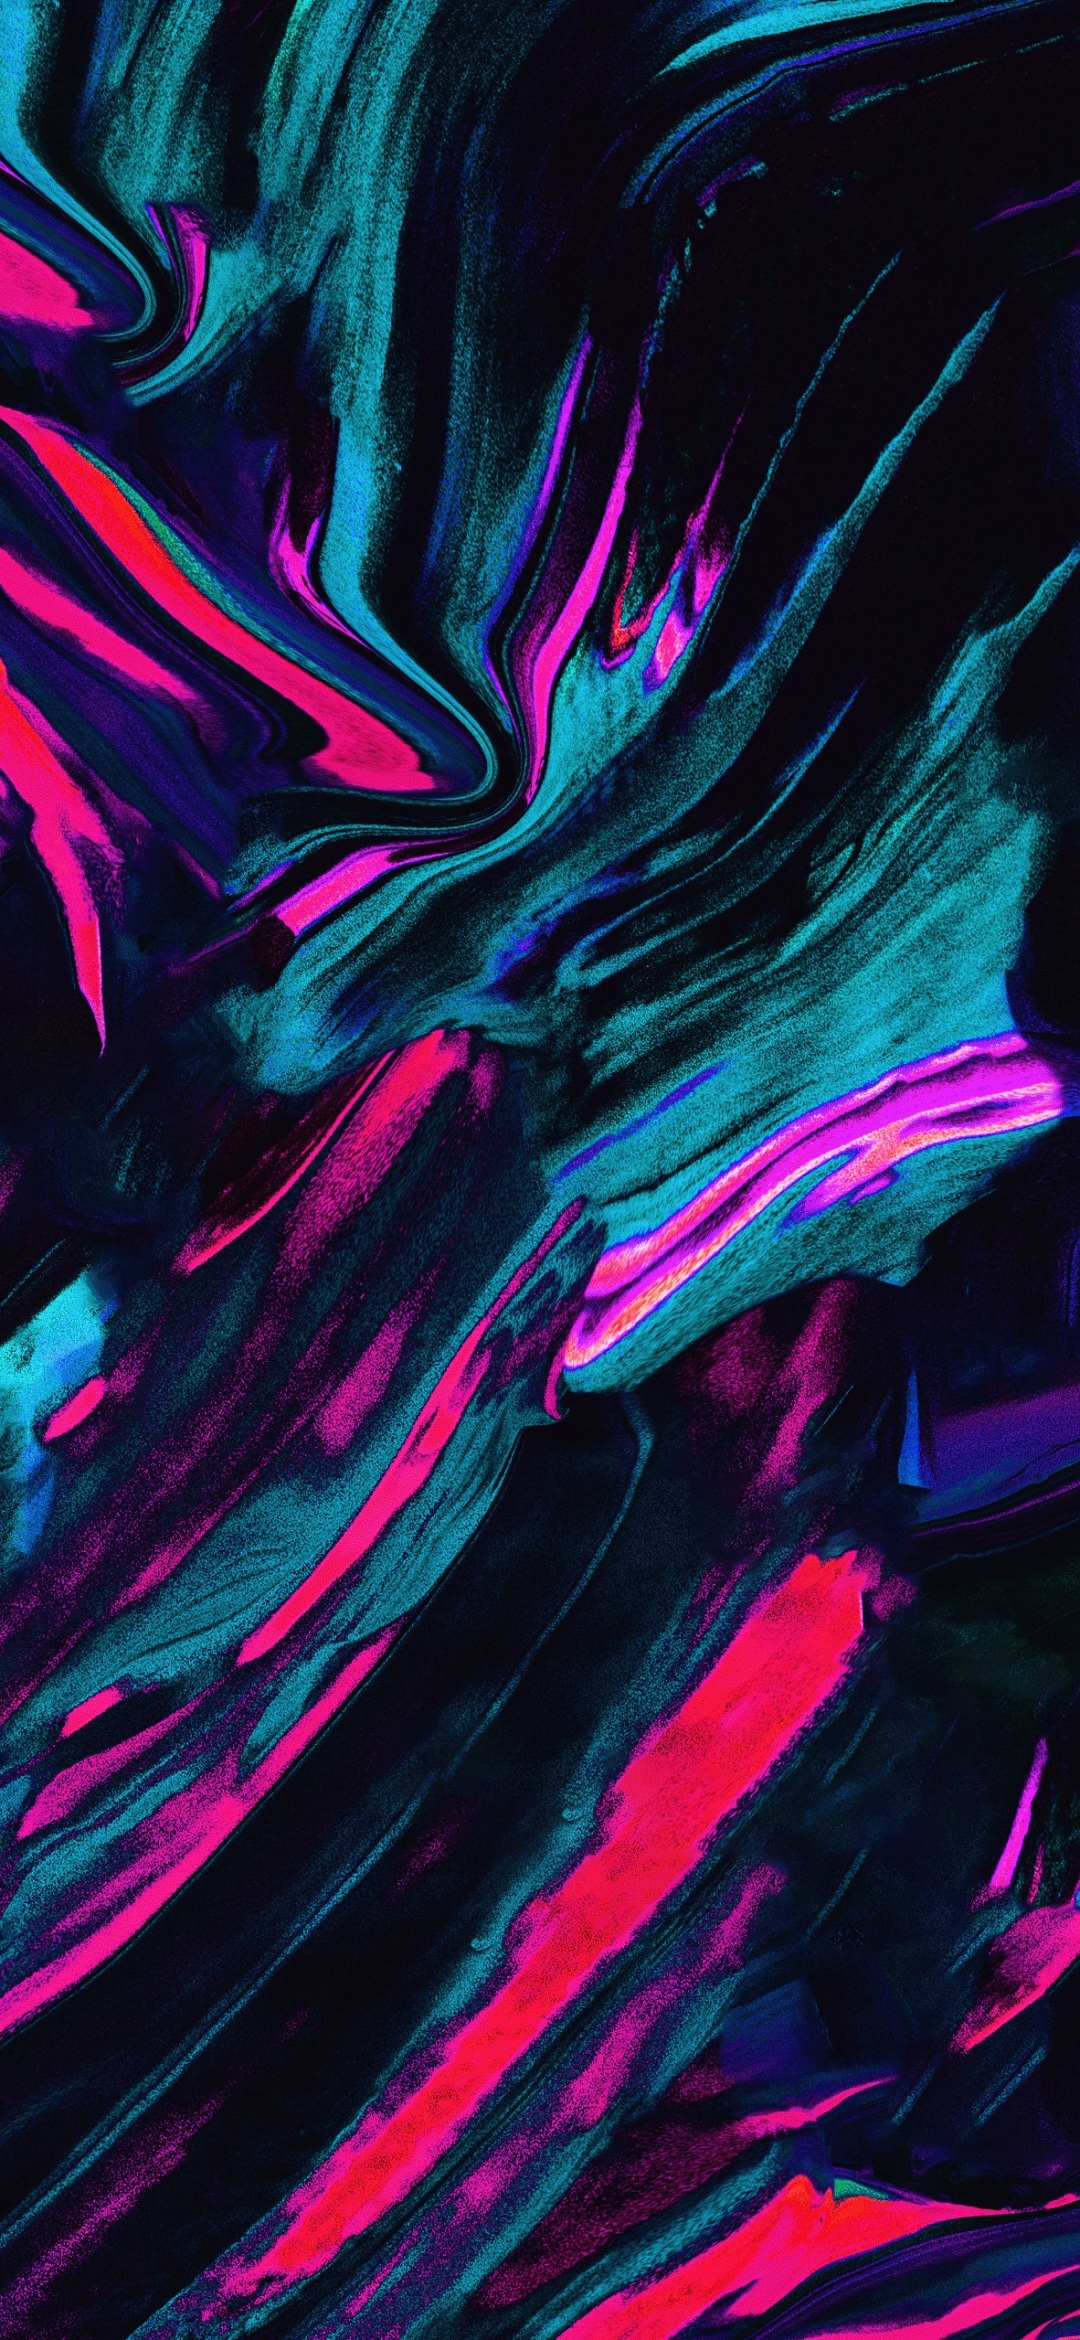 graphic design, abstract, colors